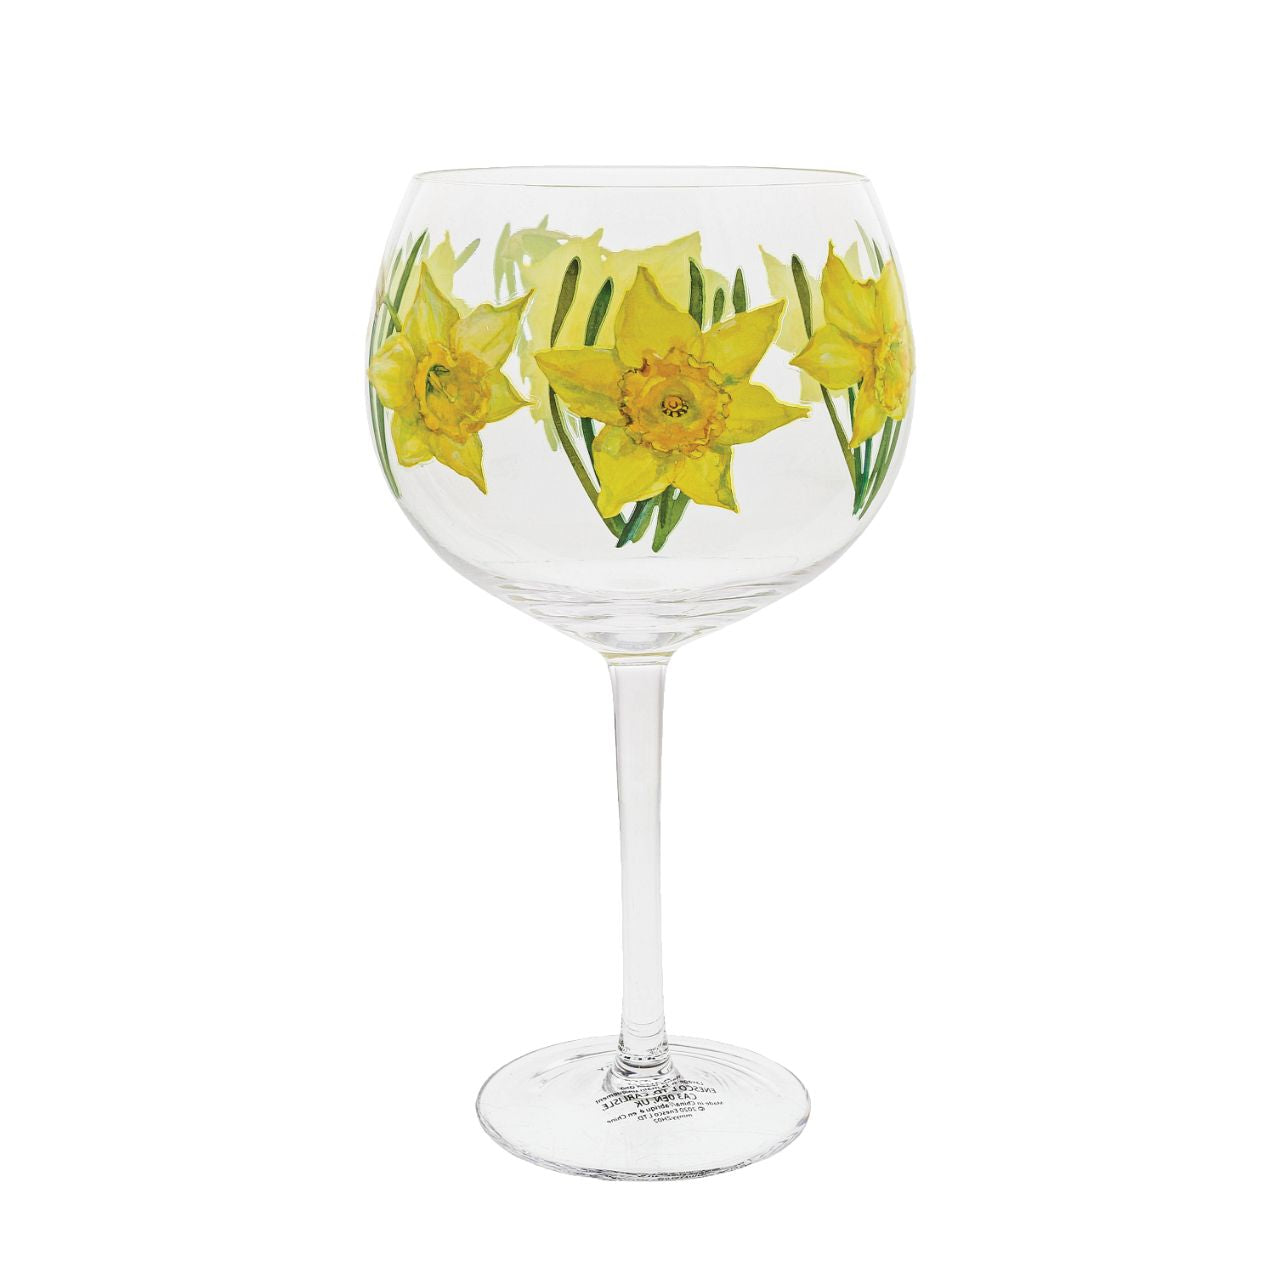 Copa Daffodil Gin Glass  The Daffodil gin glass is ideal for celebrating a new path. Daffodils signify the beginning of springtime, they represent rebirth and new beginnings, and so, they are the perfect gift to help someone special celebrate new achievements and goals. Pair with a fresh lemon gin and tonic for a refreshing gift.